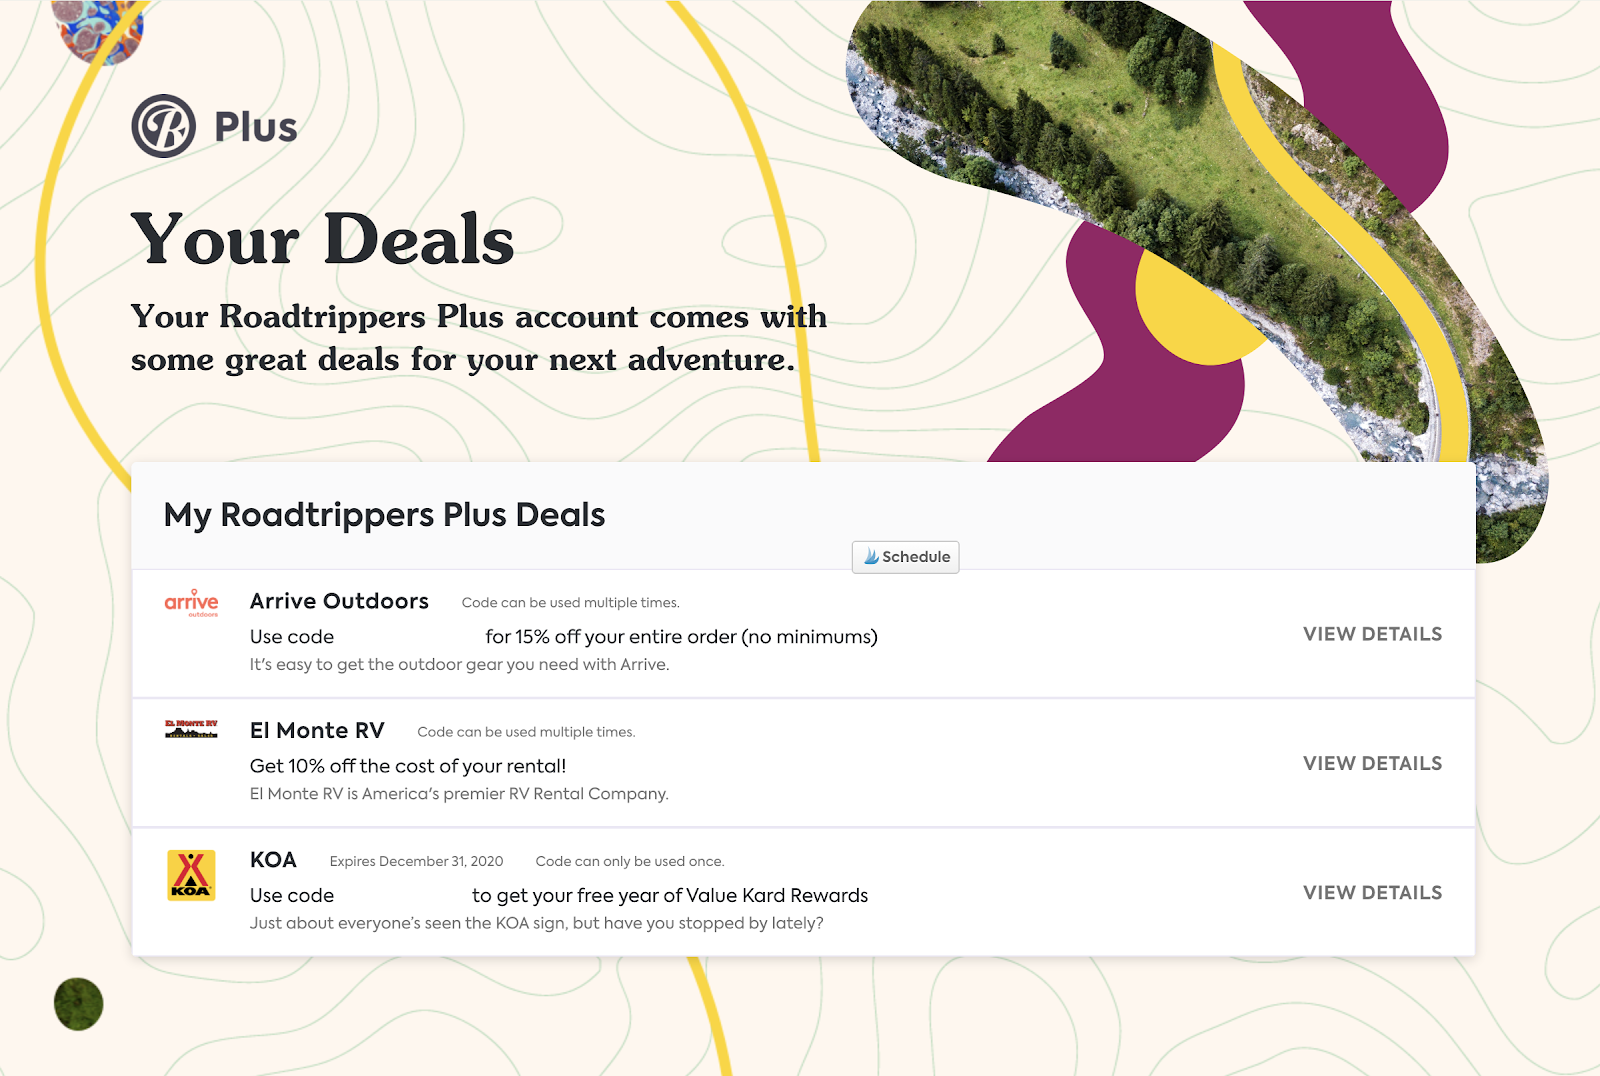 screen shot showing deals available with plus plan in Roadtrippers